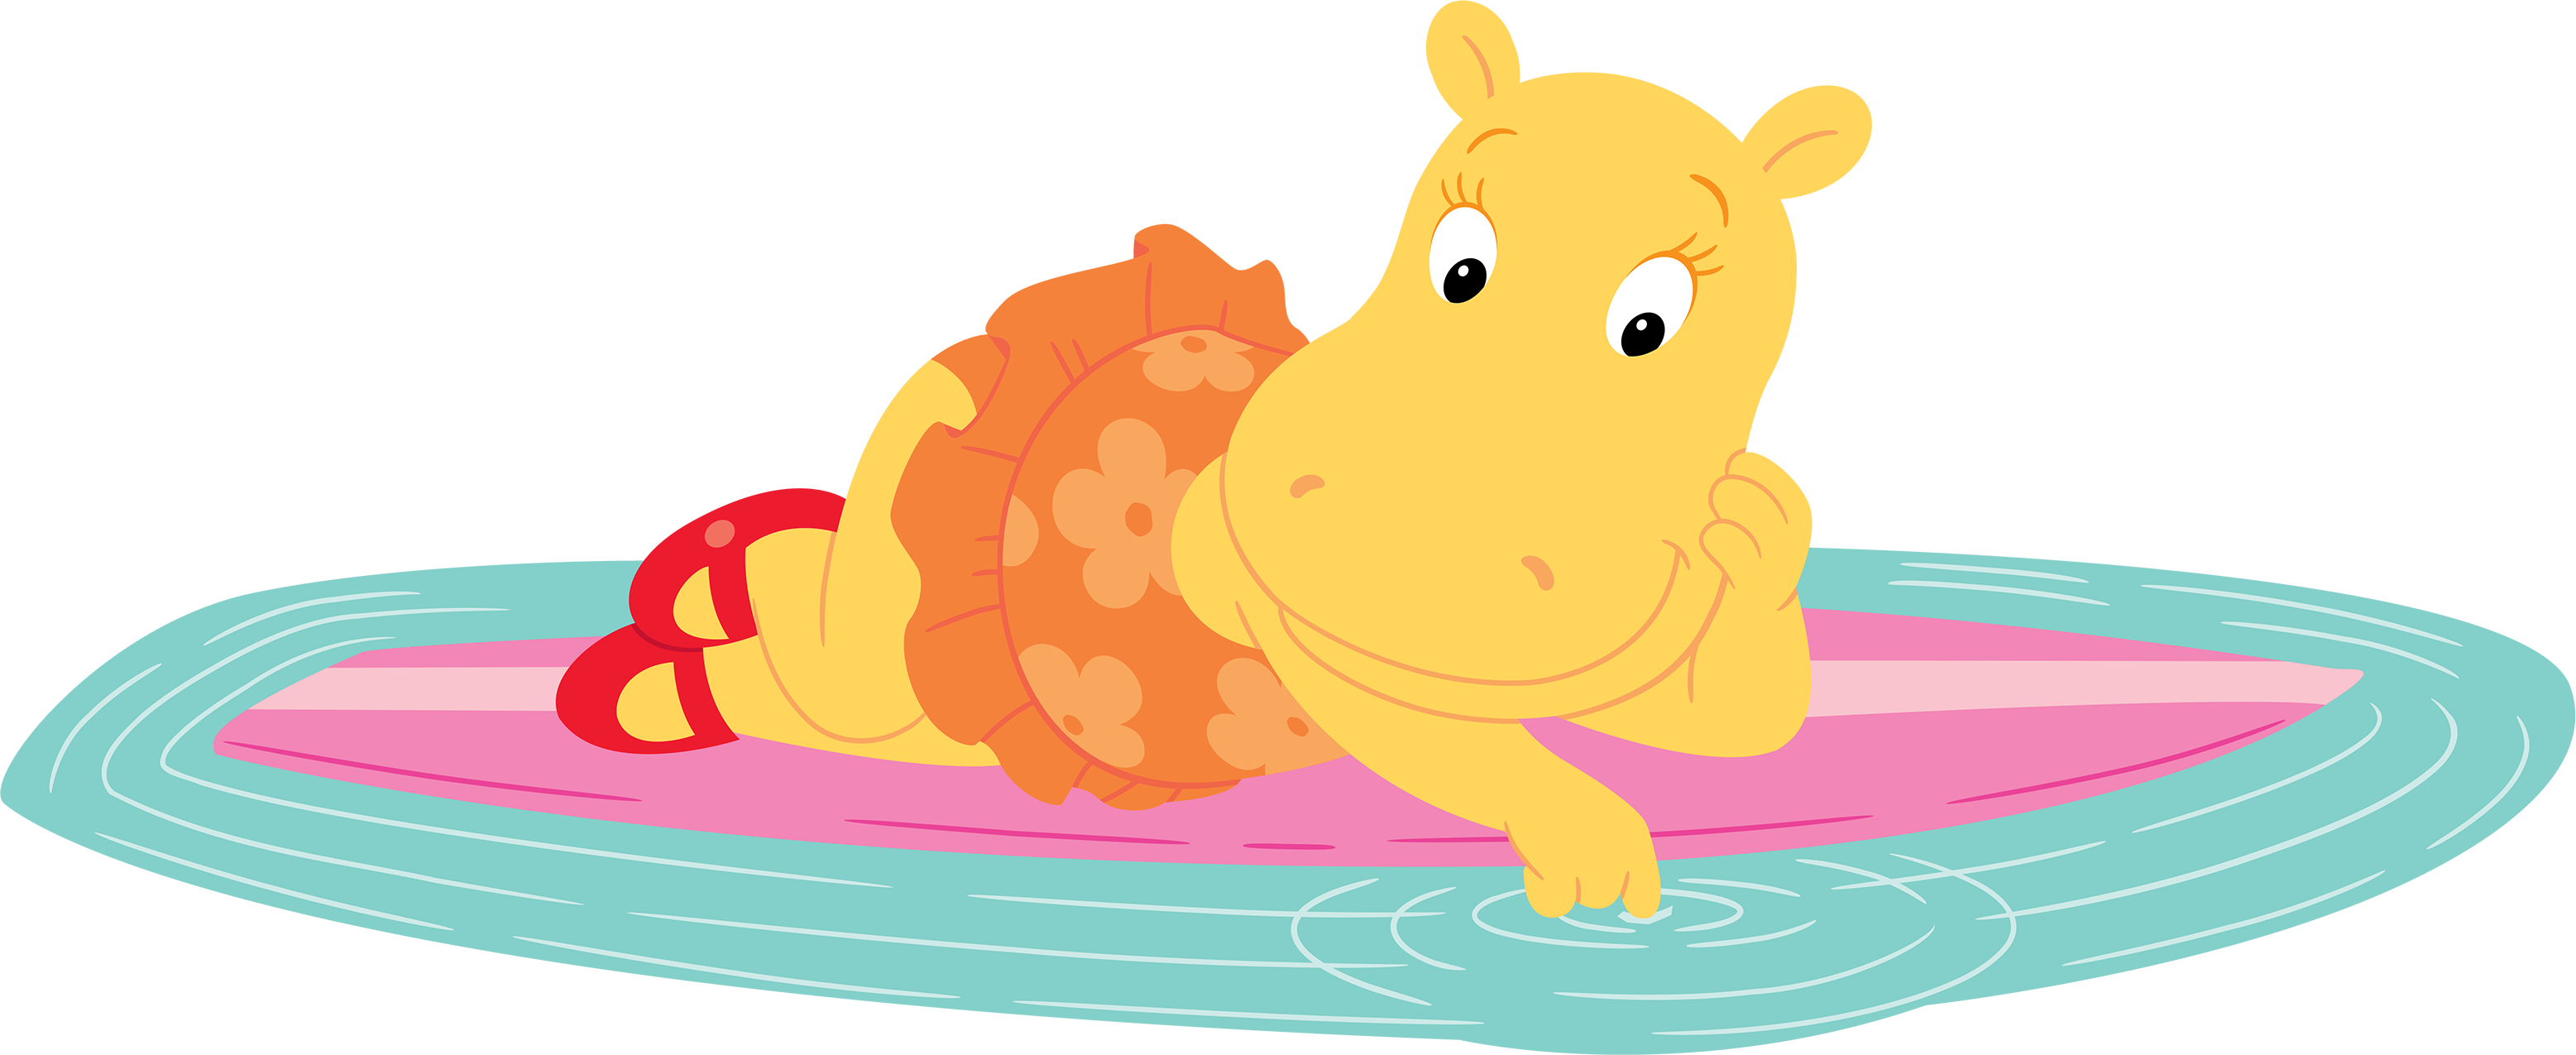 Download and share clipart about The Backyardigans Beach Bonanza Tasha On S...